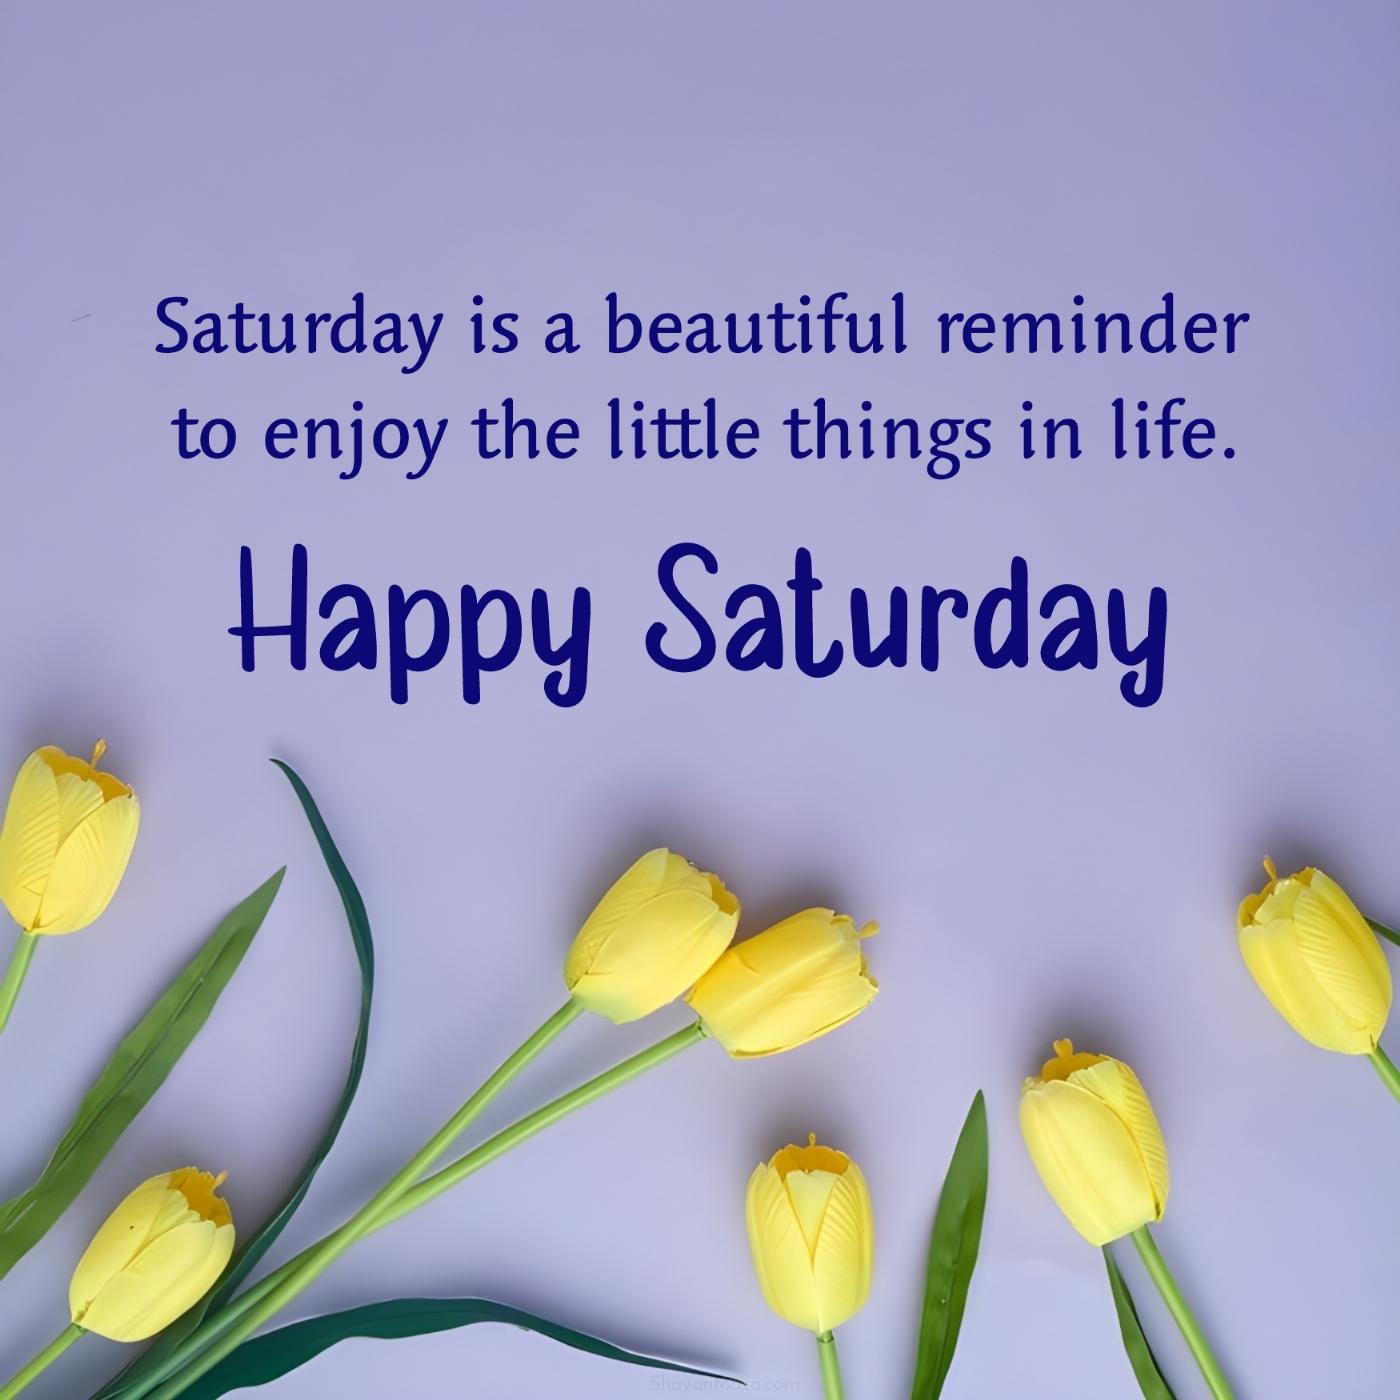 Saturday is a beautiful reminder to enjoy the little things